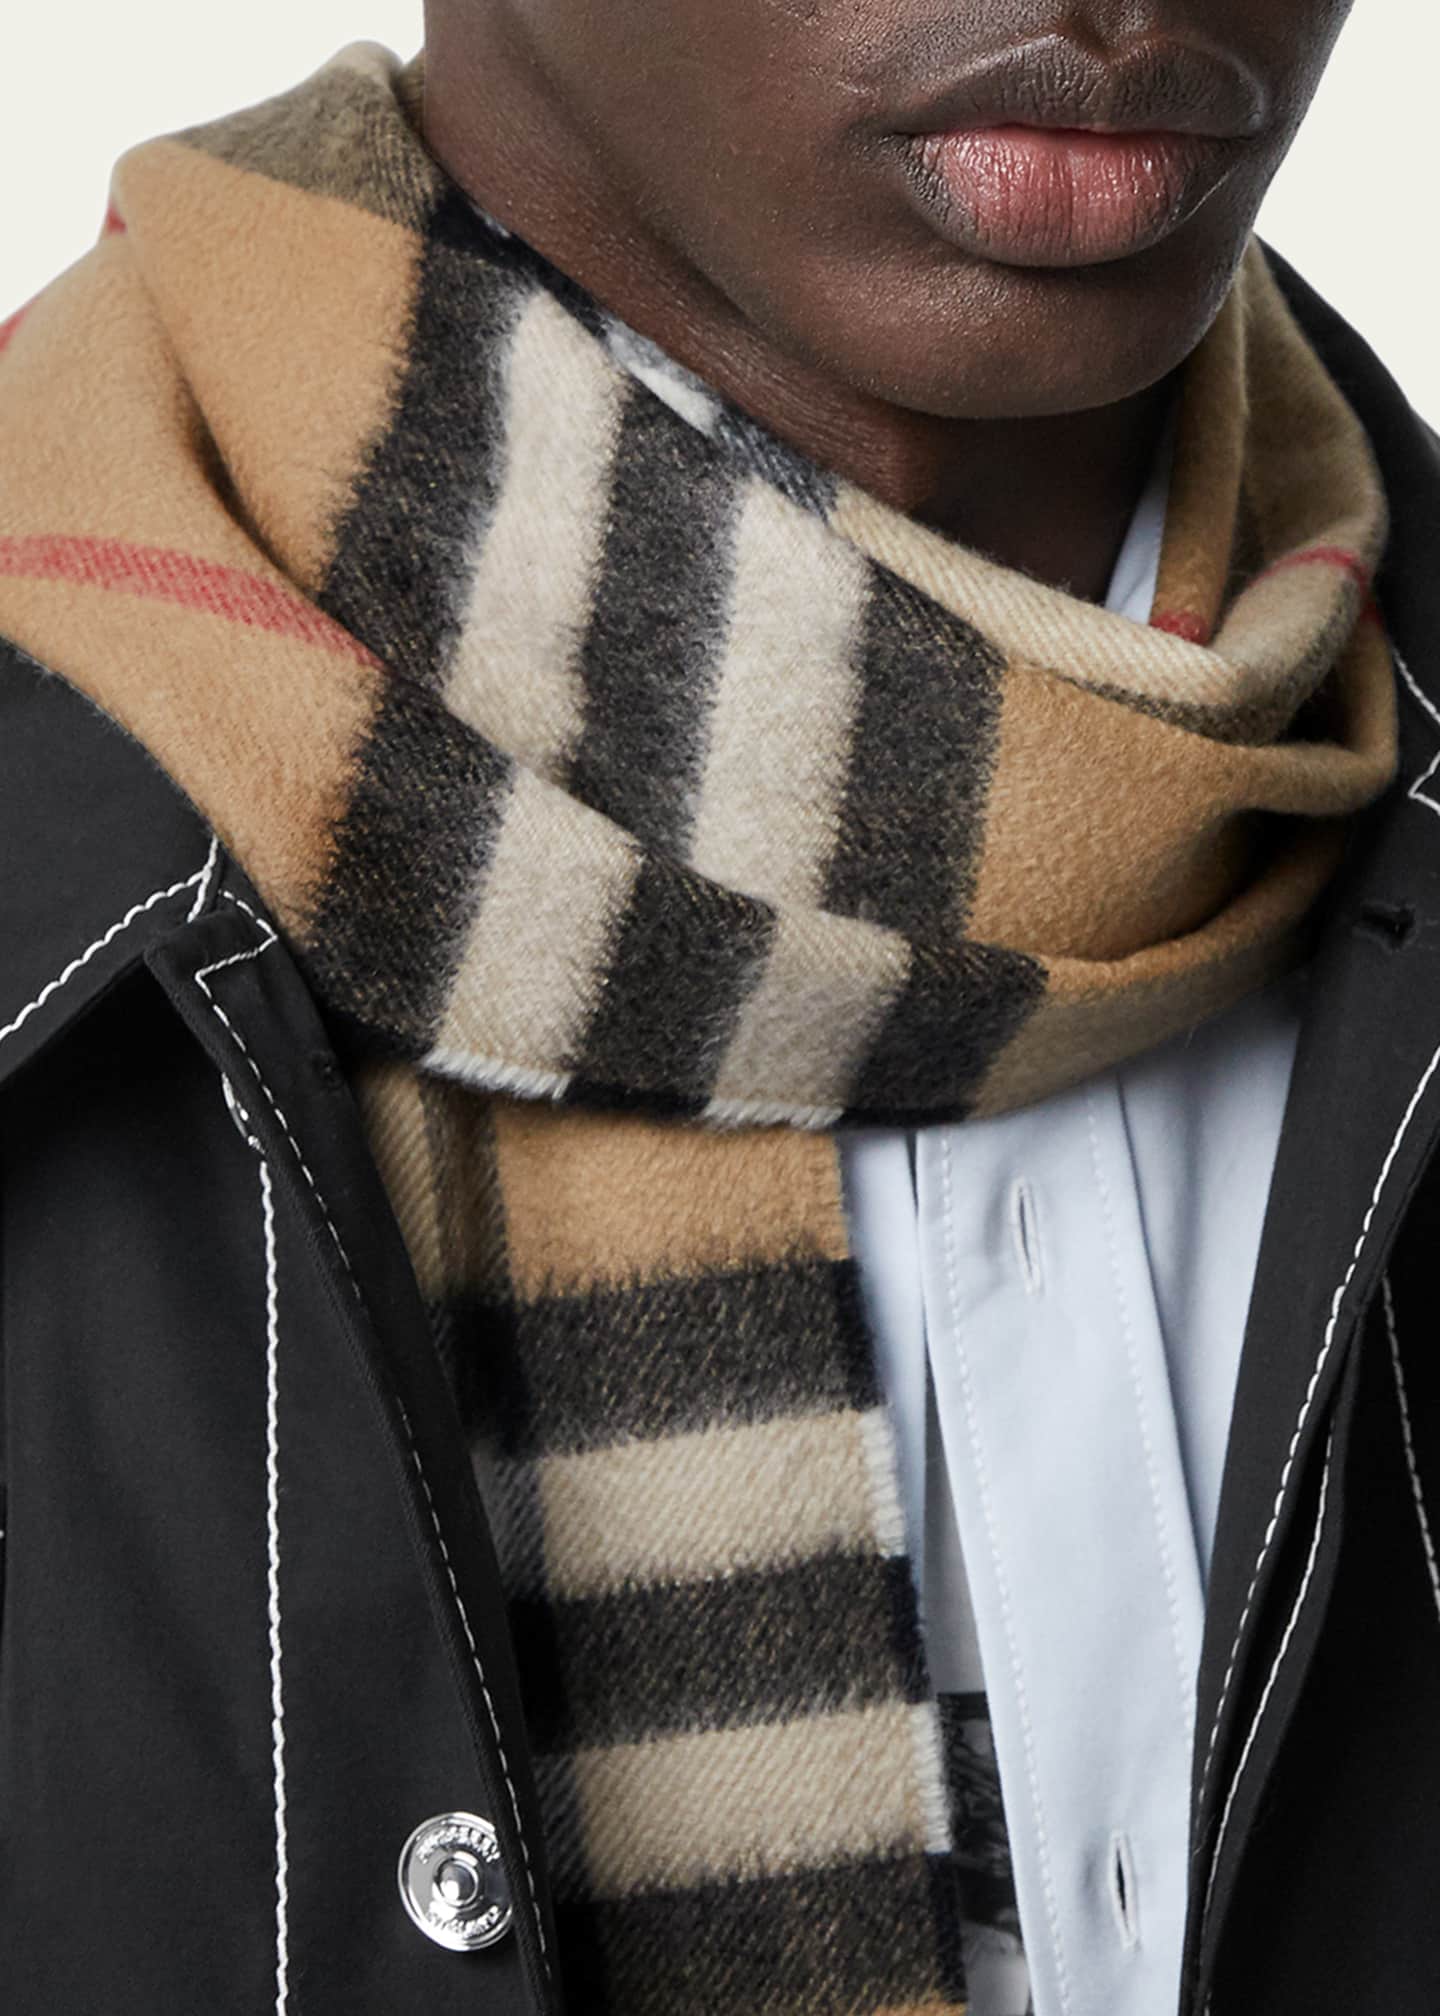 Burberry Giant check cashmere scarf